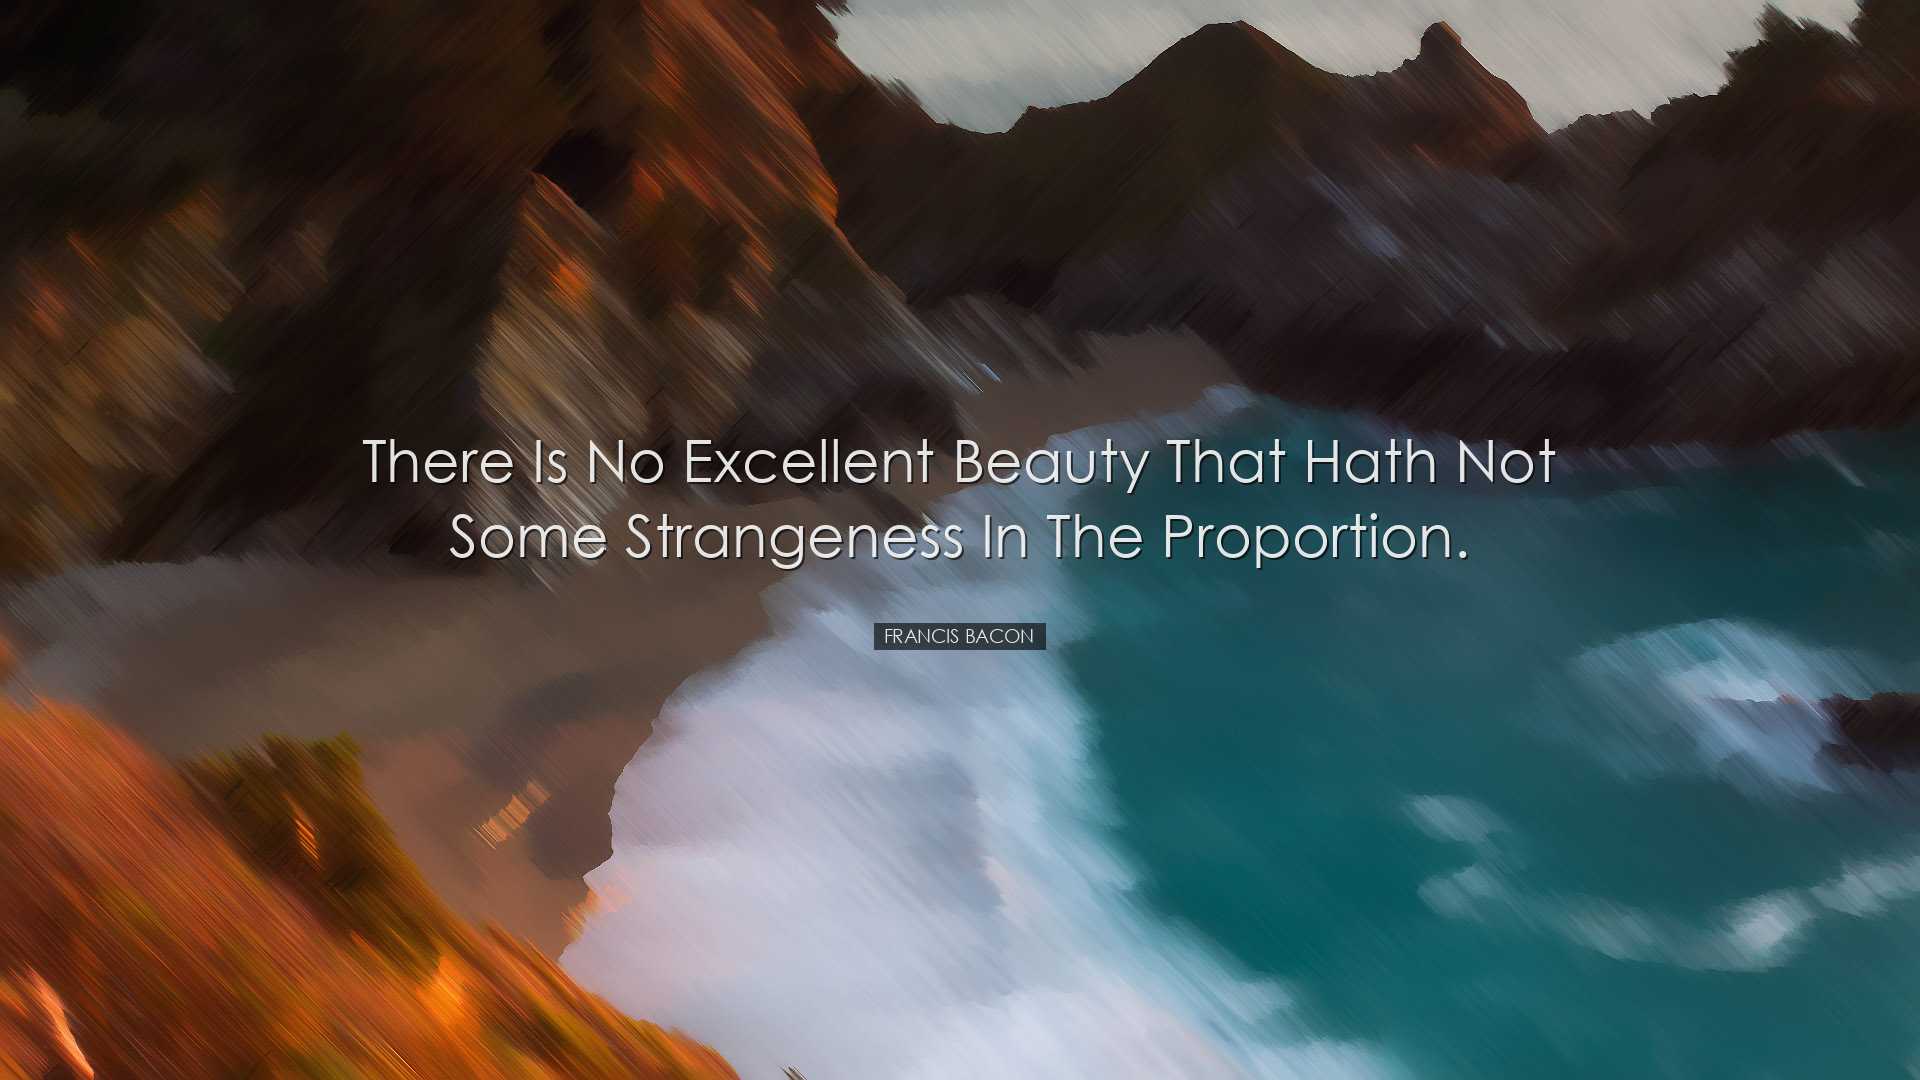 There is no excellent beauty that hath not some strangeness in the